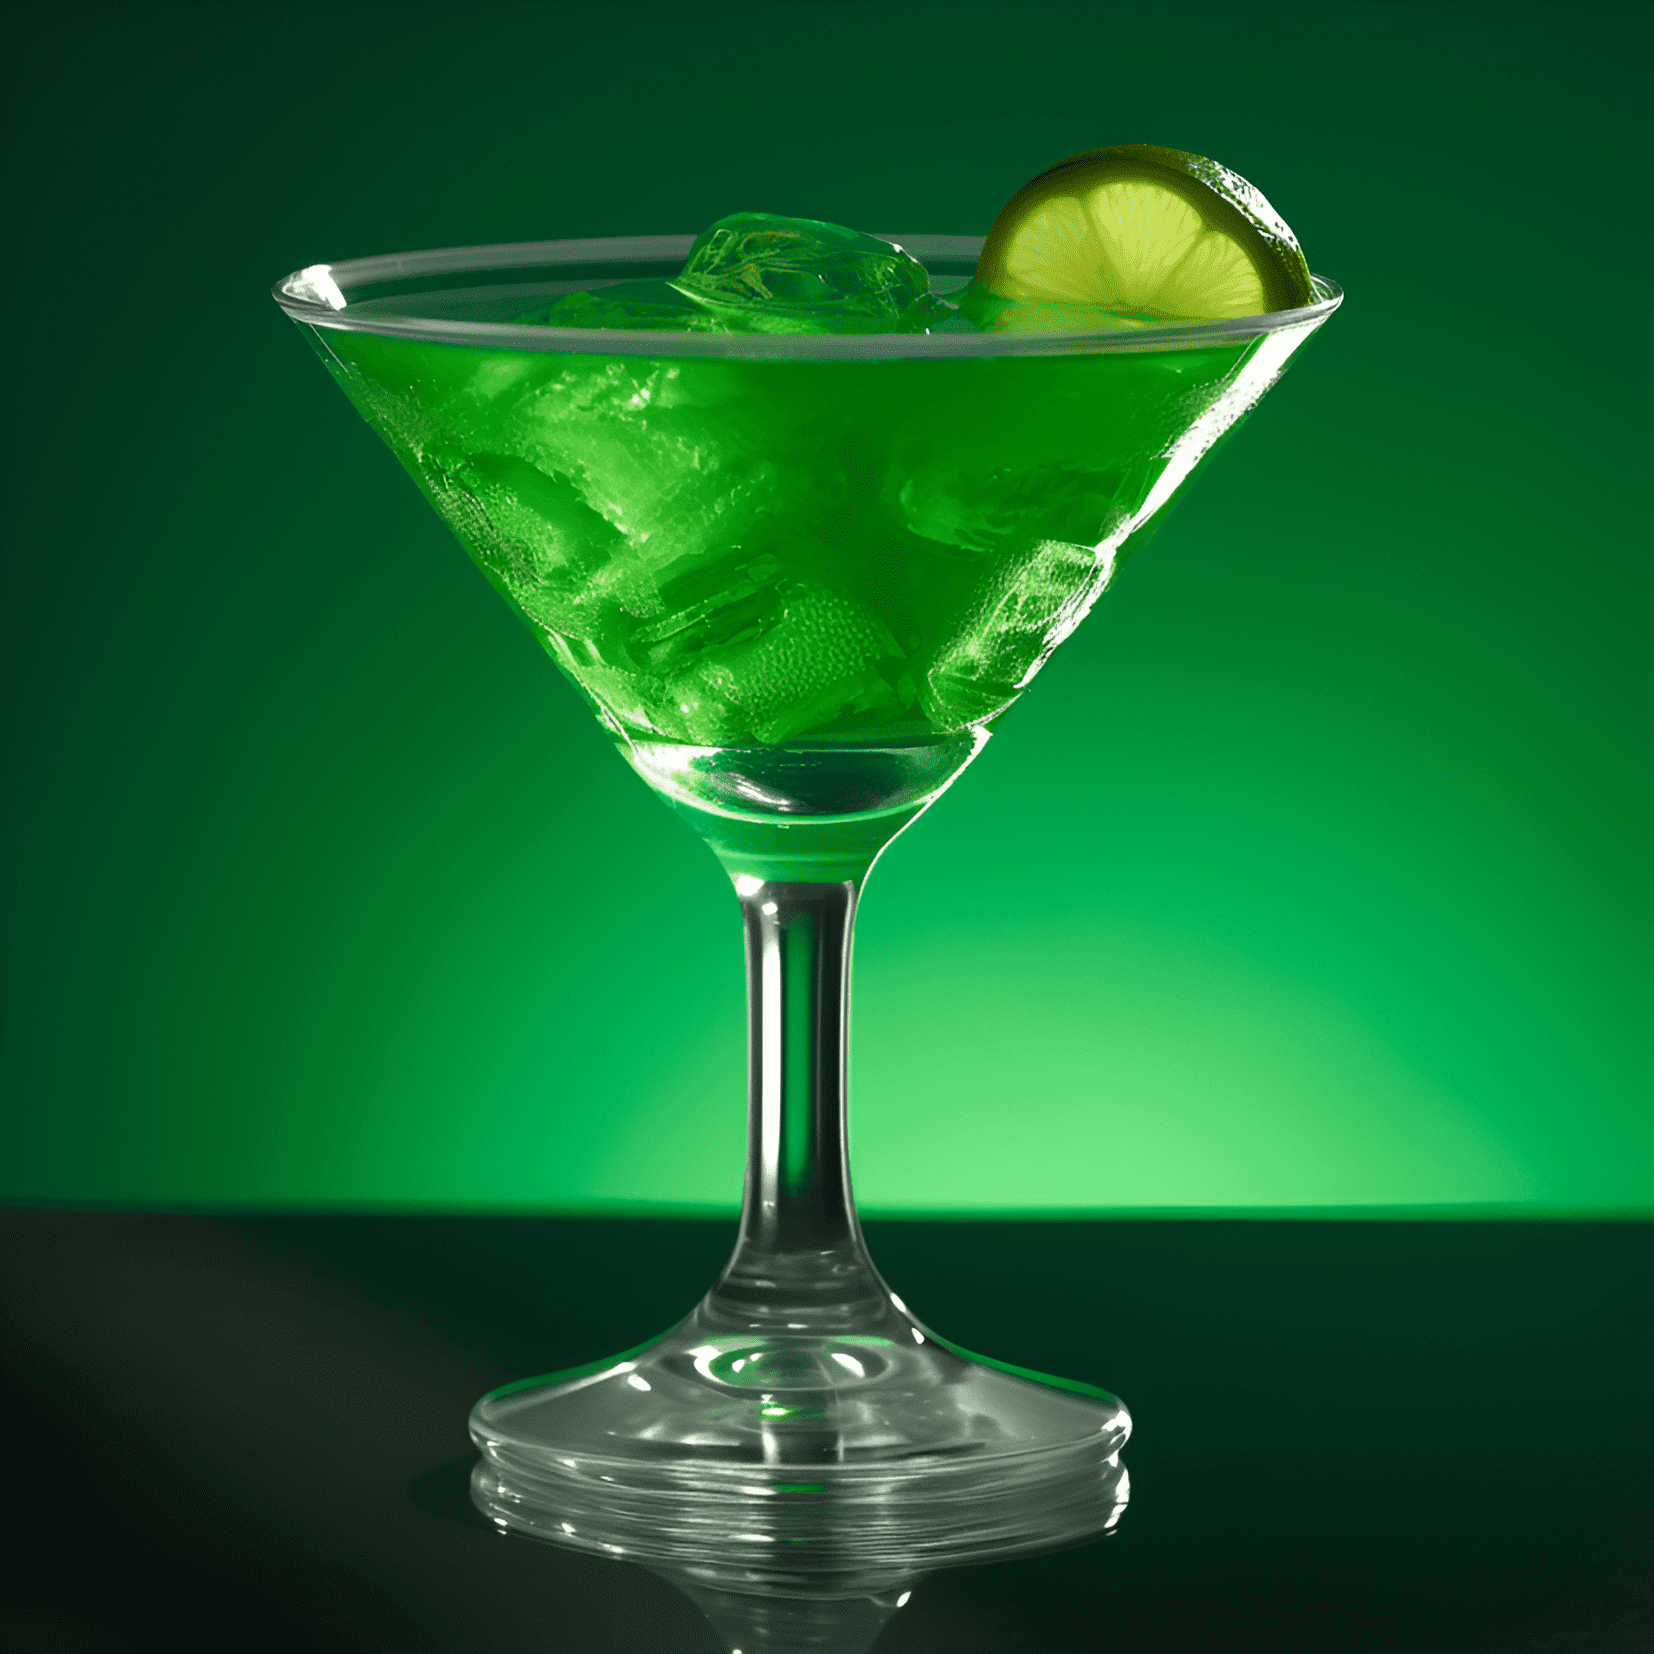 The Green Hornet cocktail is a refreshing, sweet, and slightly sour drink with a hint of mint. It has a vibrant green color and a smooth, velvety texture.